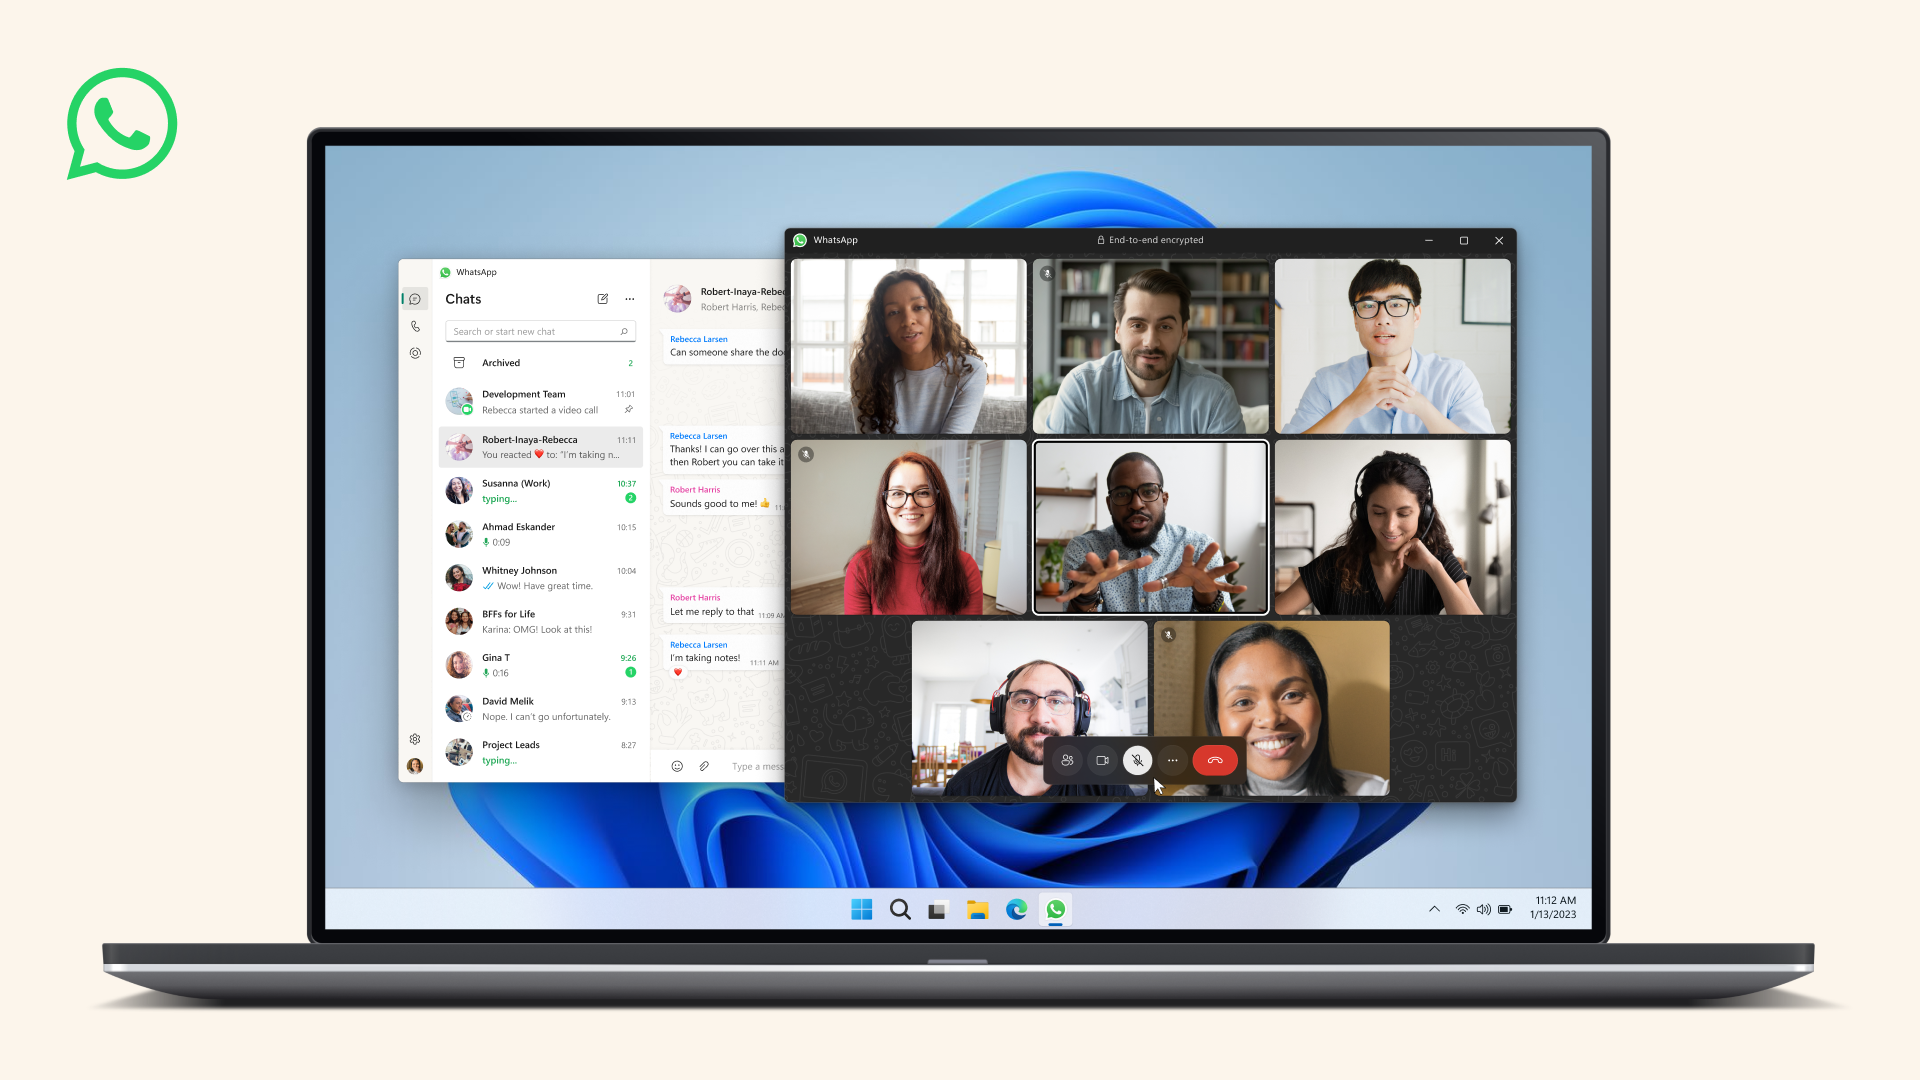 WhatsApp now allows audio and video calls on its new desktop app